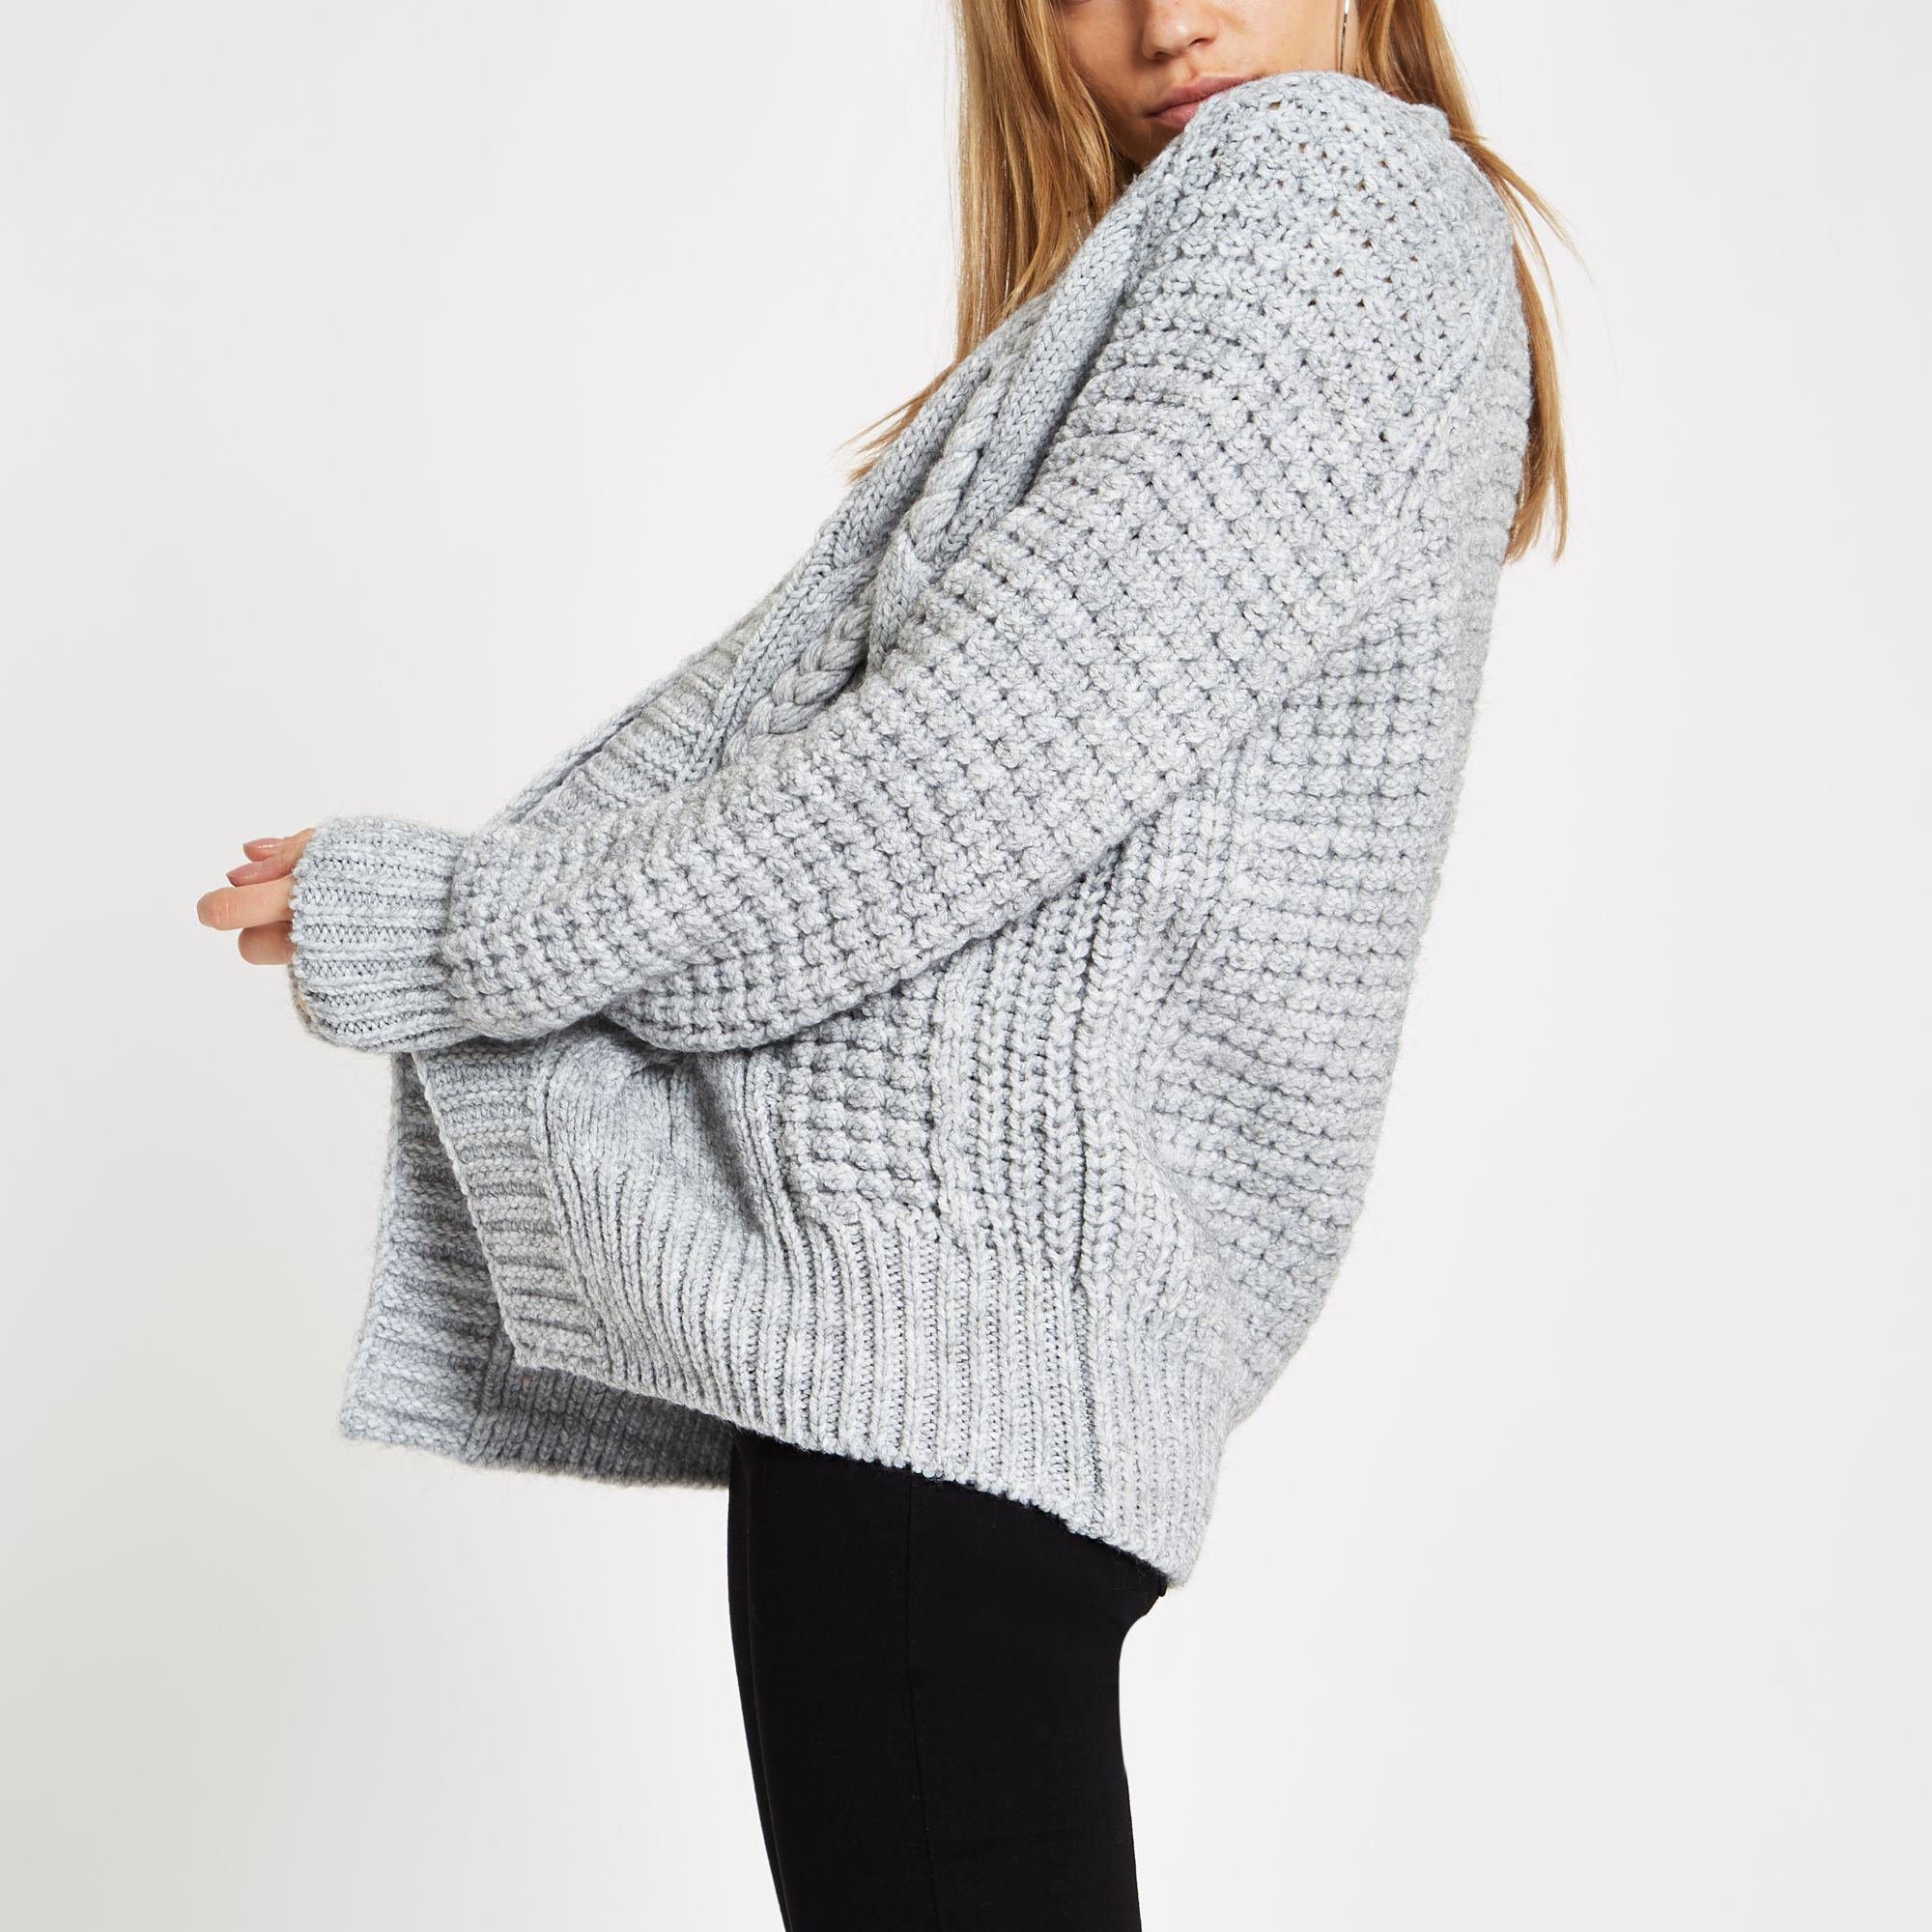 River Island Cable Knit Cardigan in Gray Lyst